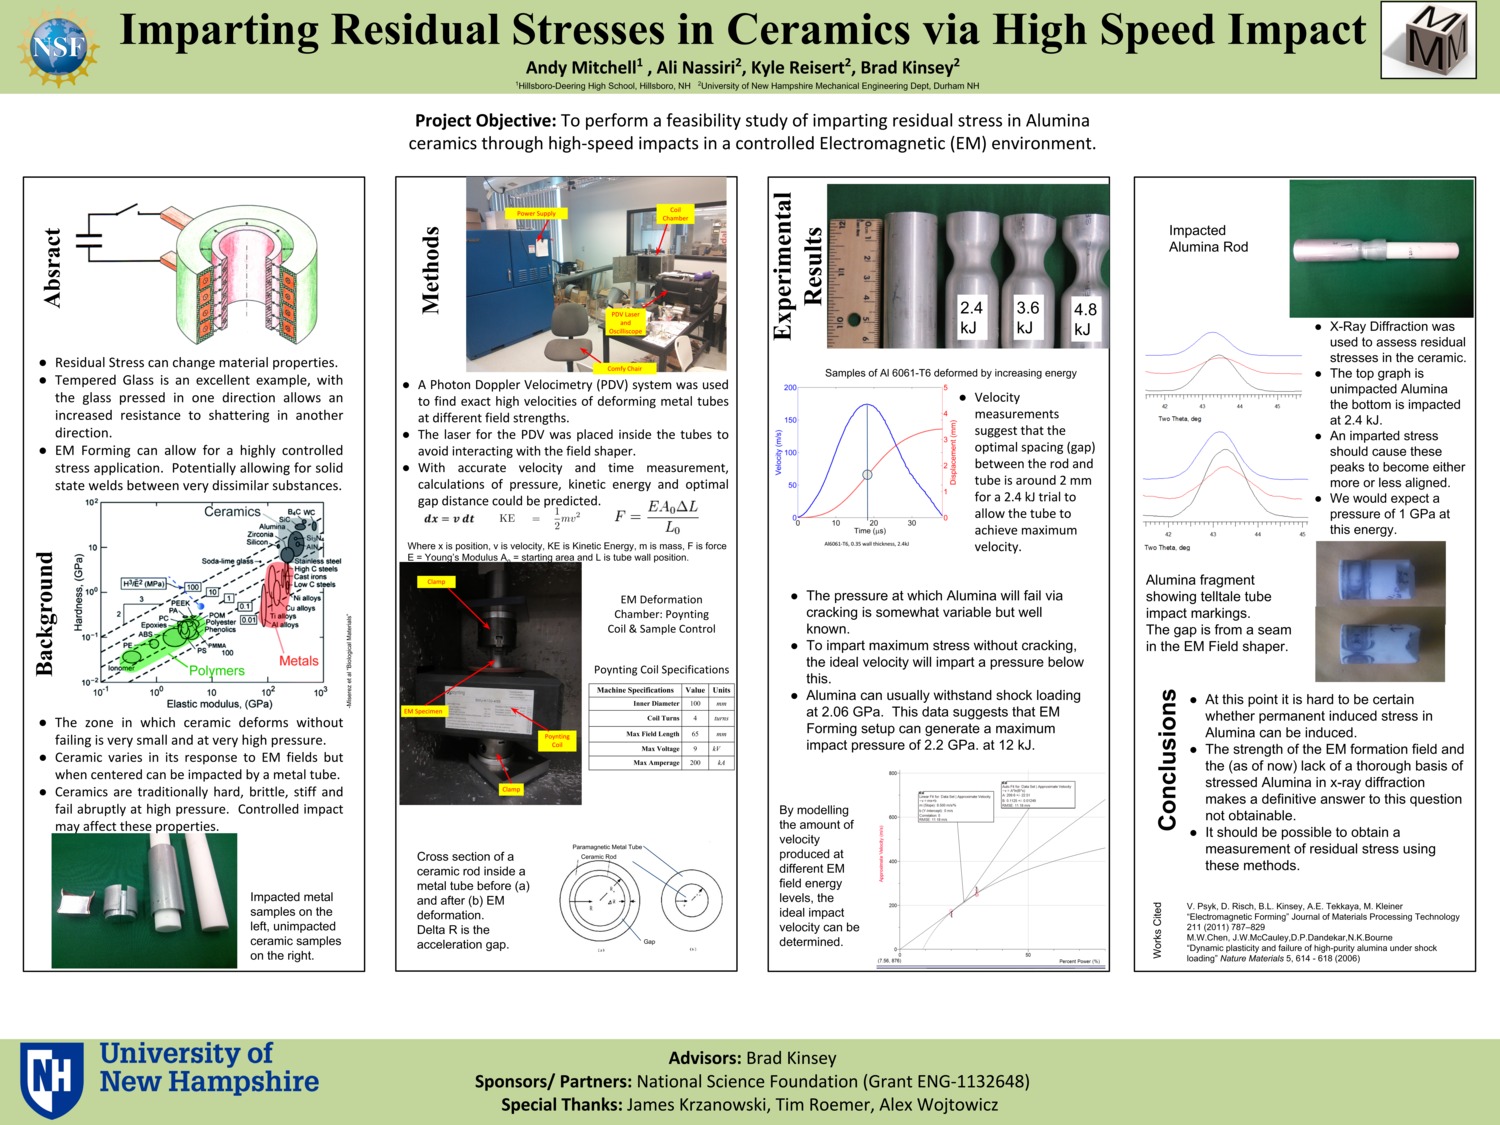 Imparting Residual Stresses In Ceramics Via High Speed Impact by andym